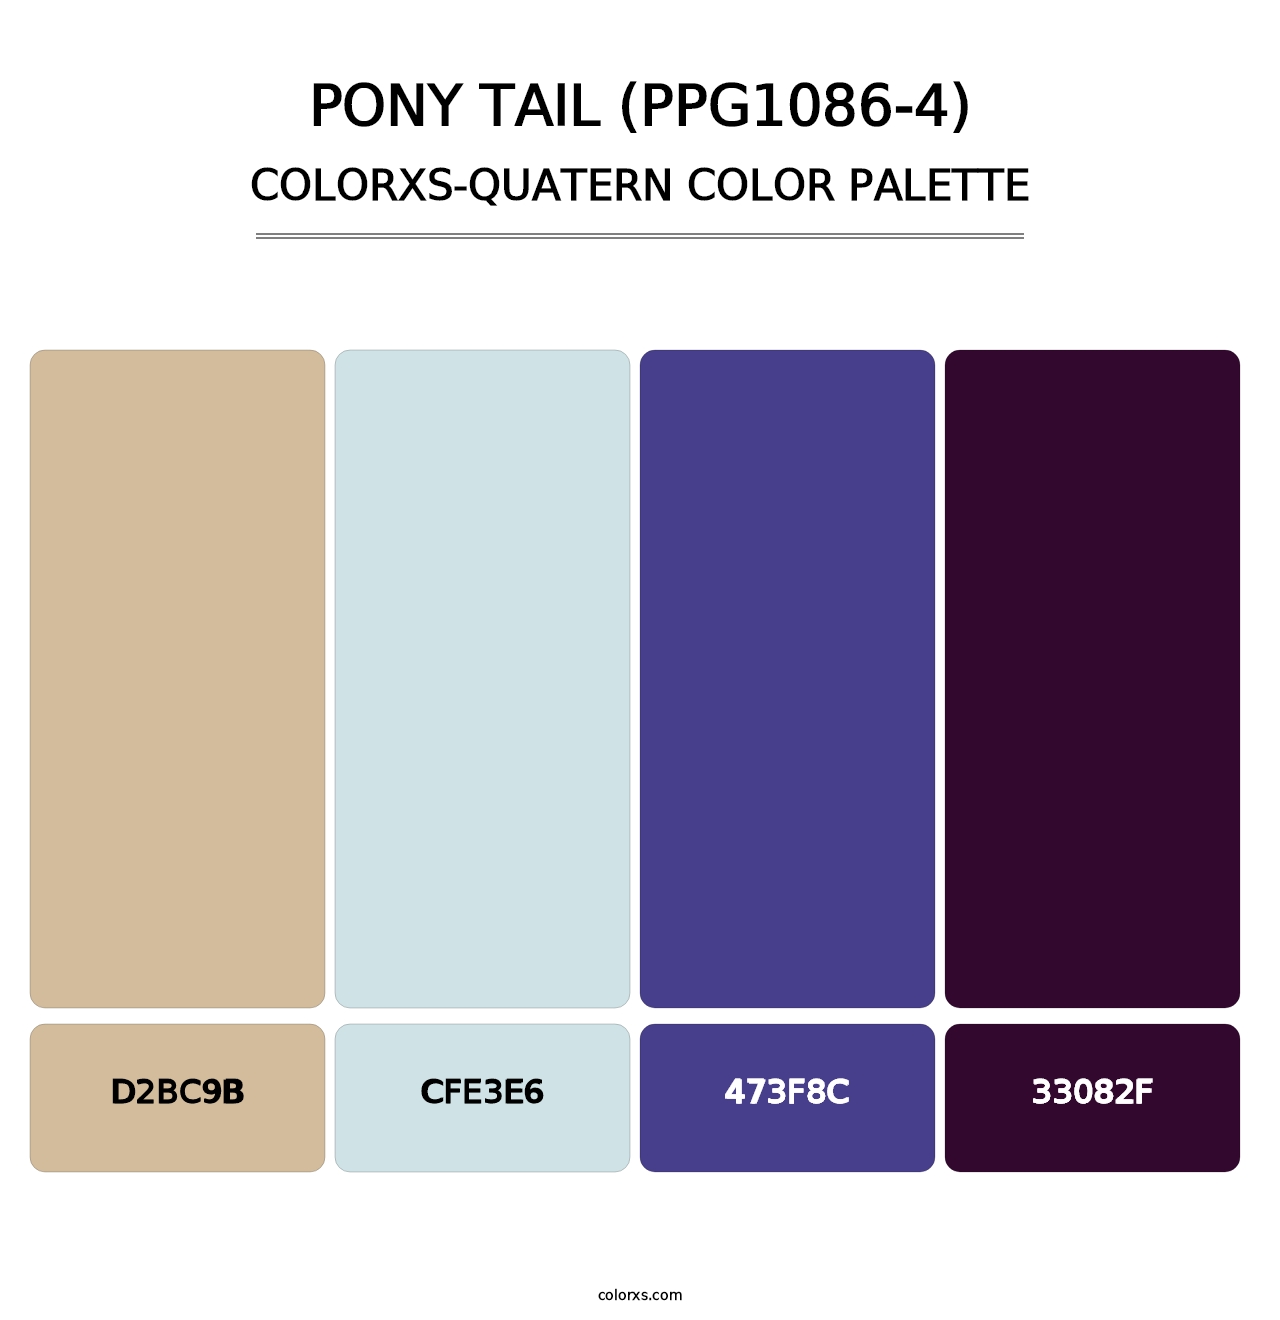 Pony Tail (PPG1086-4) - Colorxs Quatern Palette